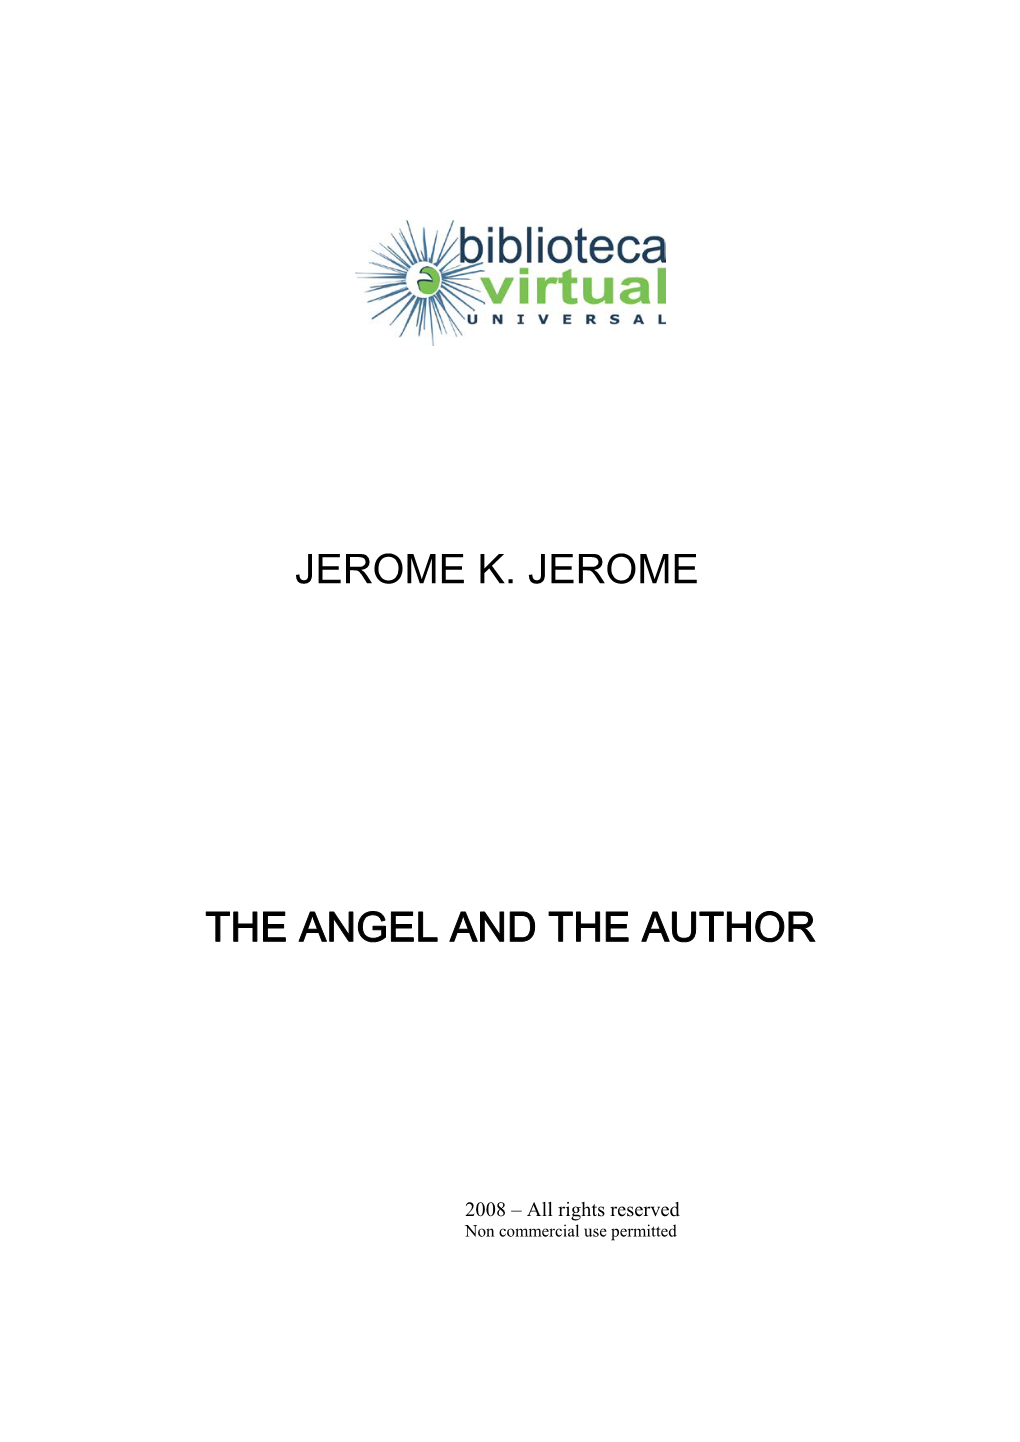 Jerome K. Jerome the Angel and the Author